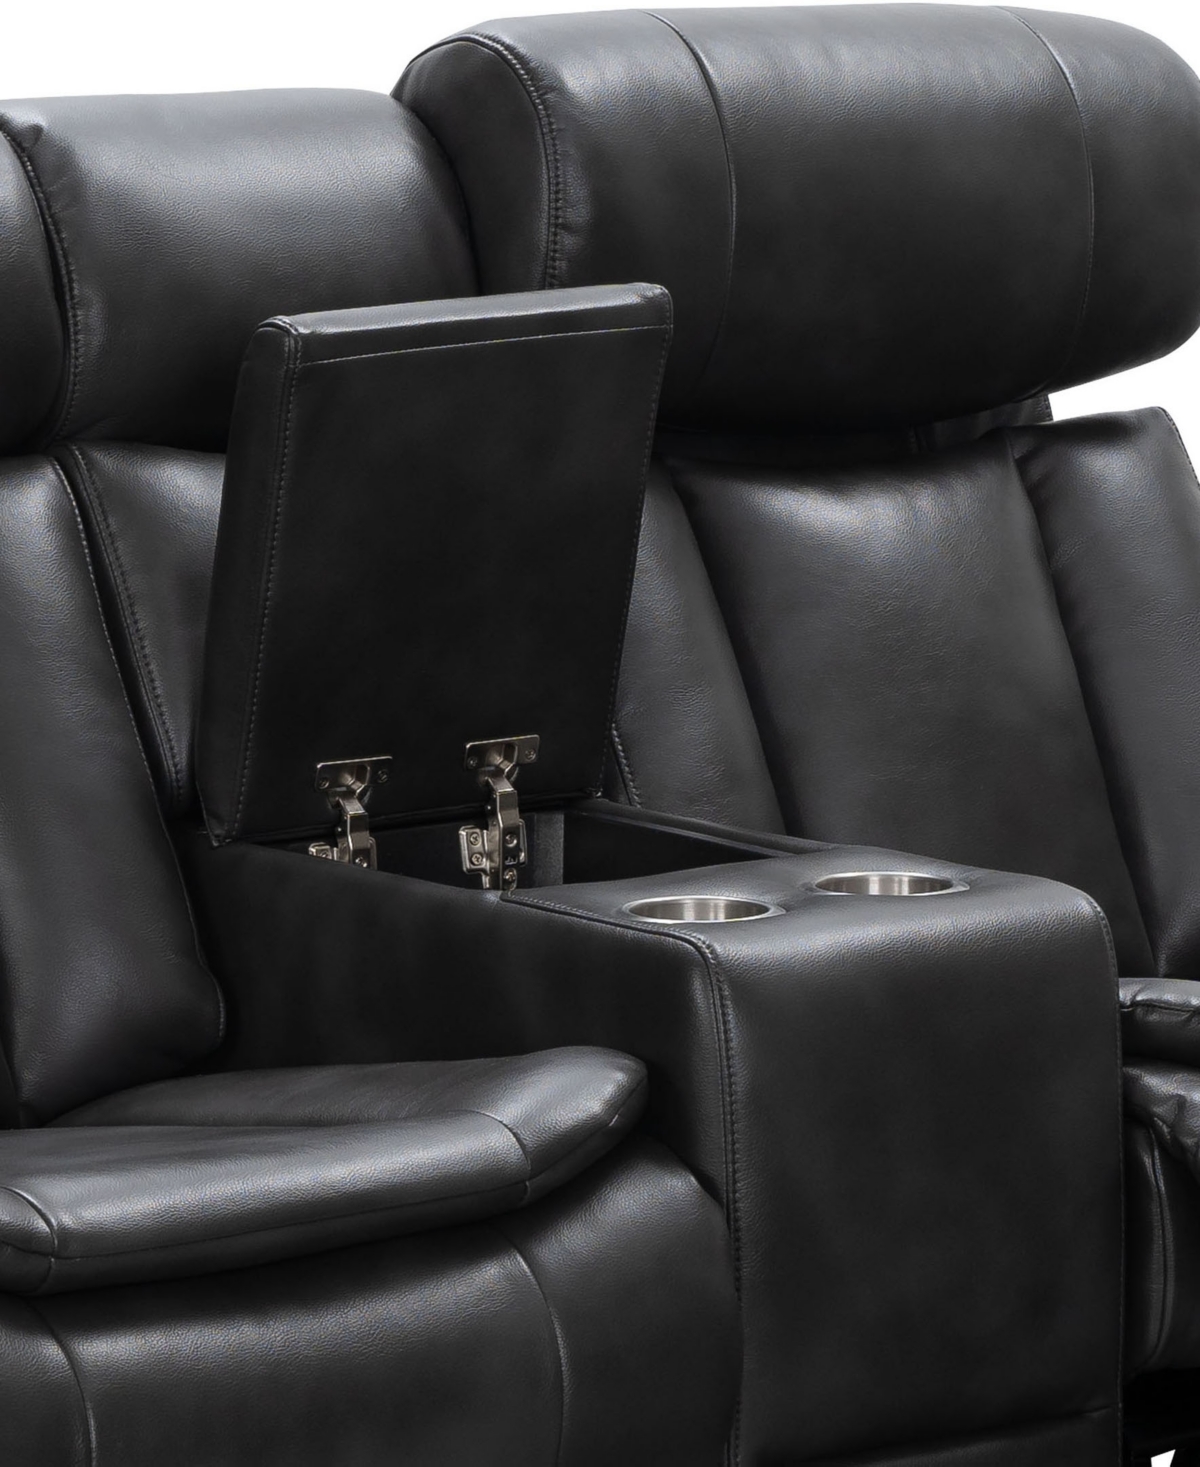 Shop Abbyson Living Zackary 74" Leather Power Reclining Console Loveseat With Power Headrest In Black